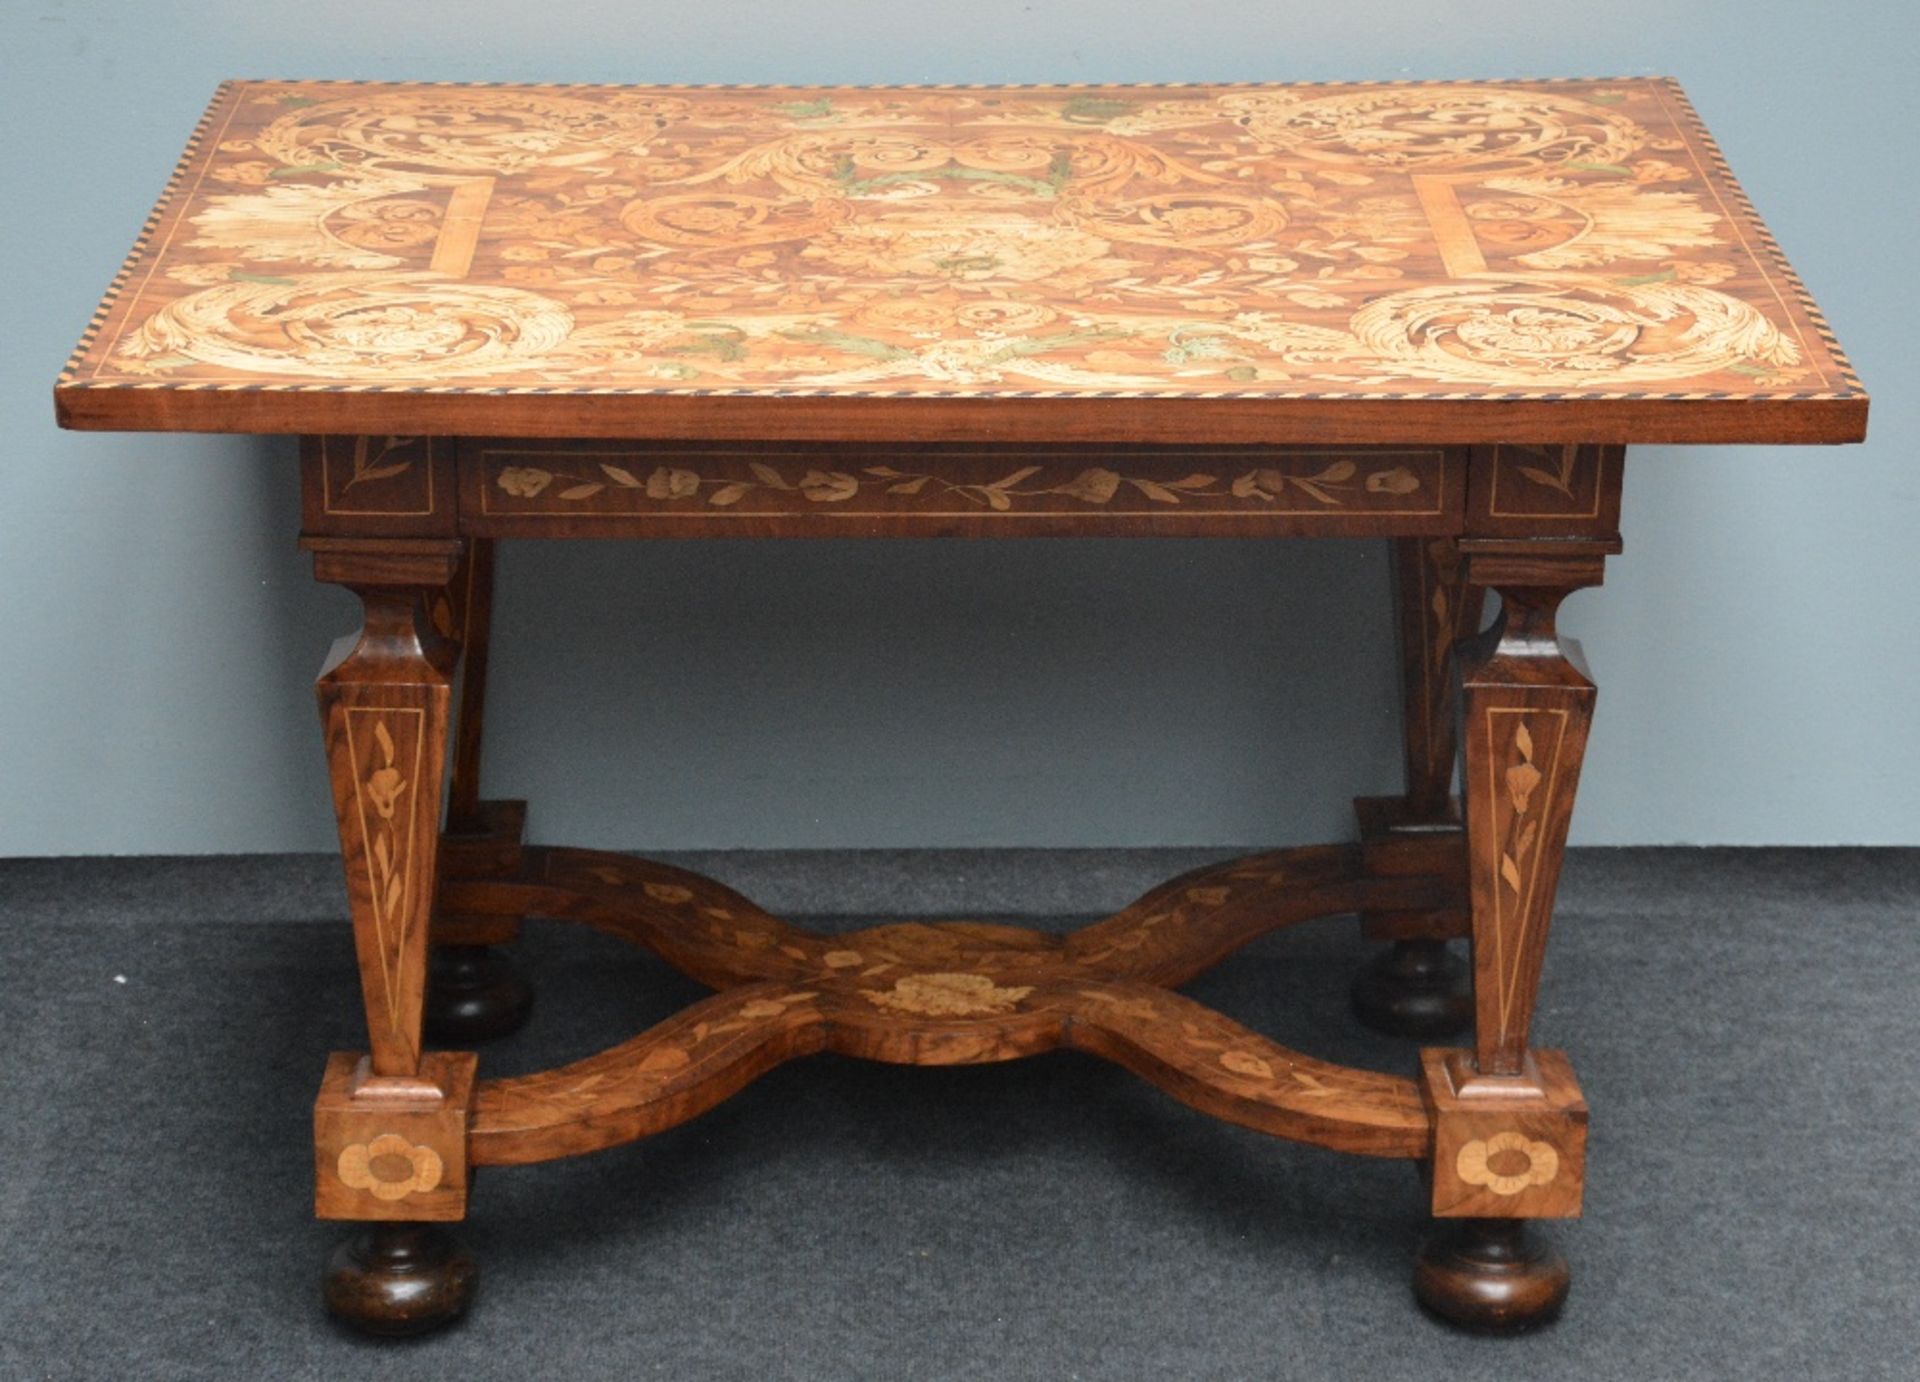 An exceptional LXIV-style Dutch writing desk with walnut veneer and marquetry, early 18thC; added - Bild 5 aus 11